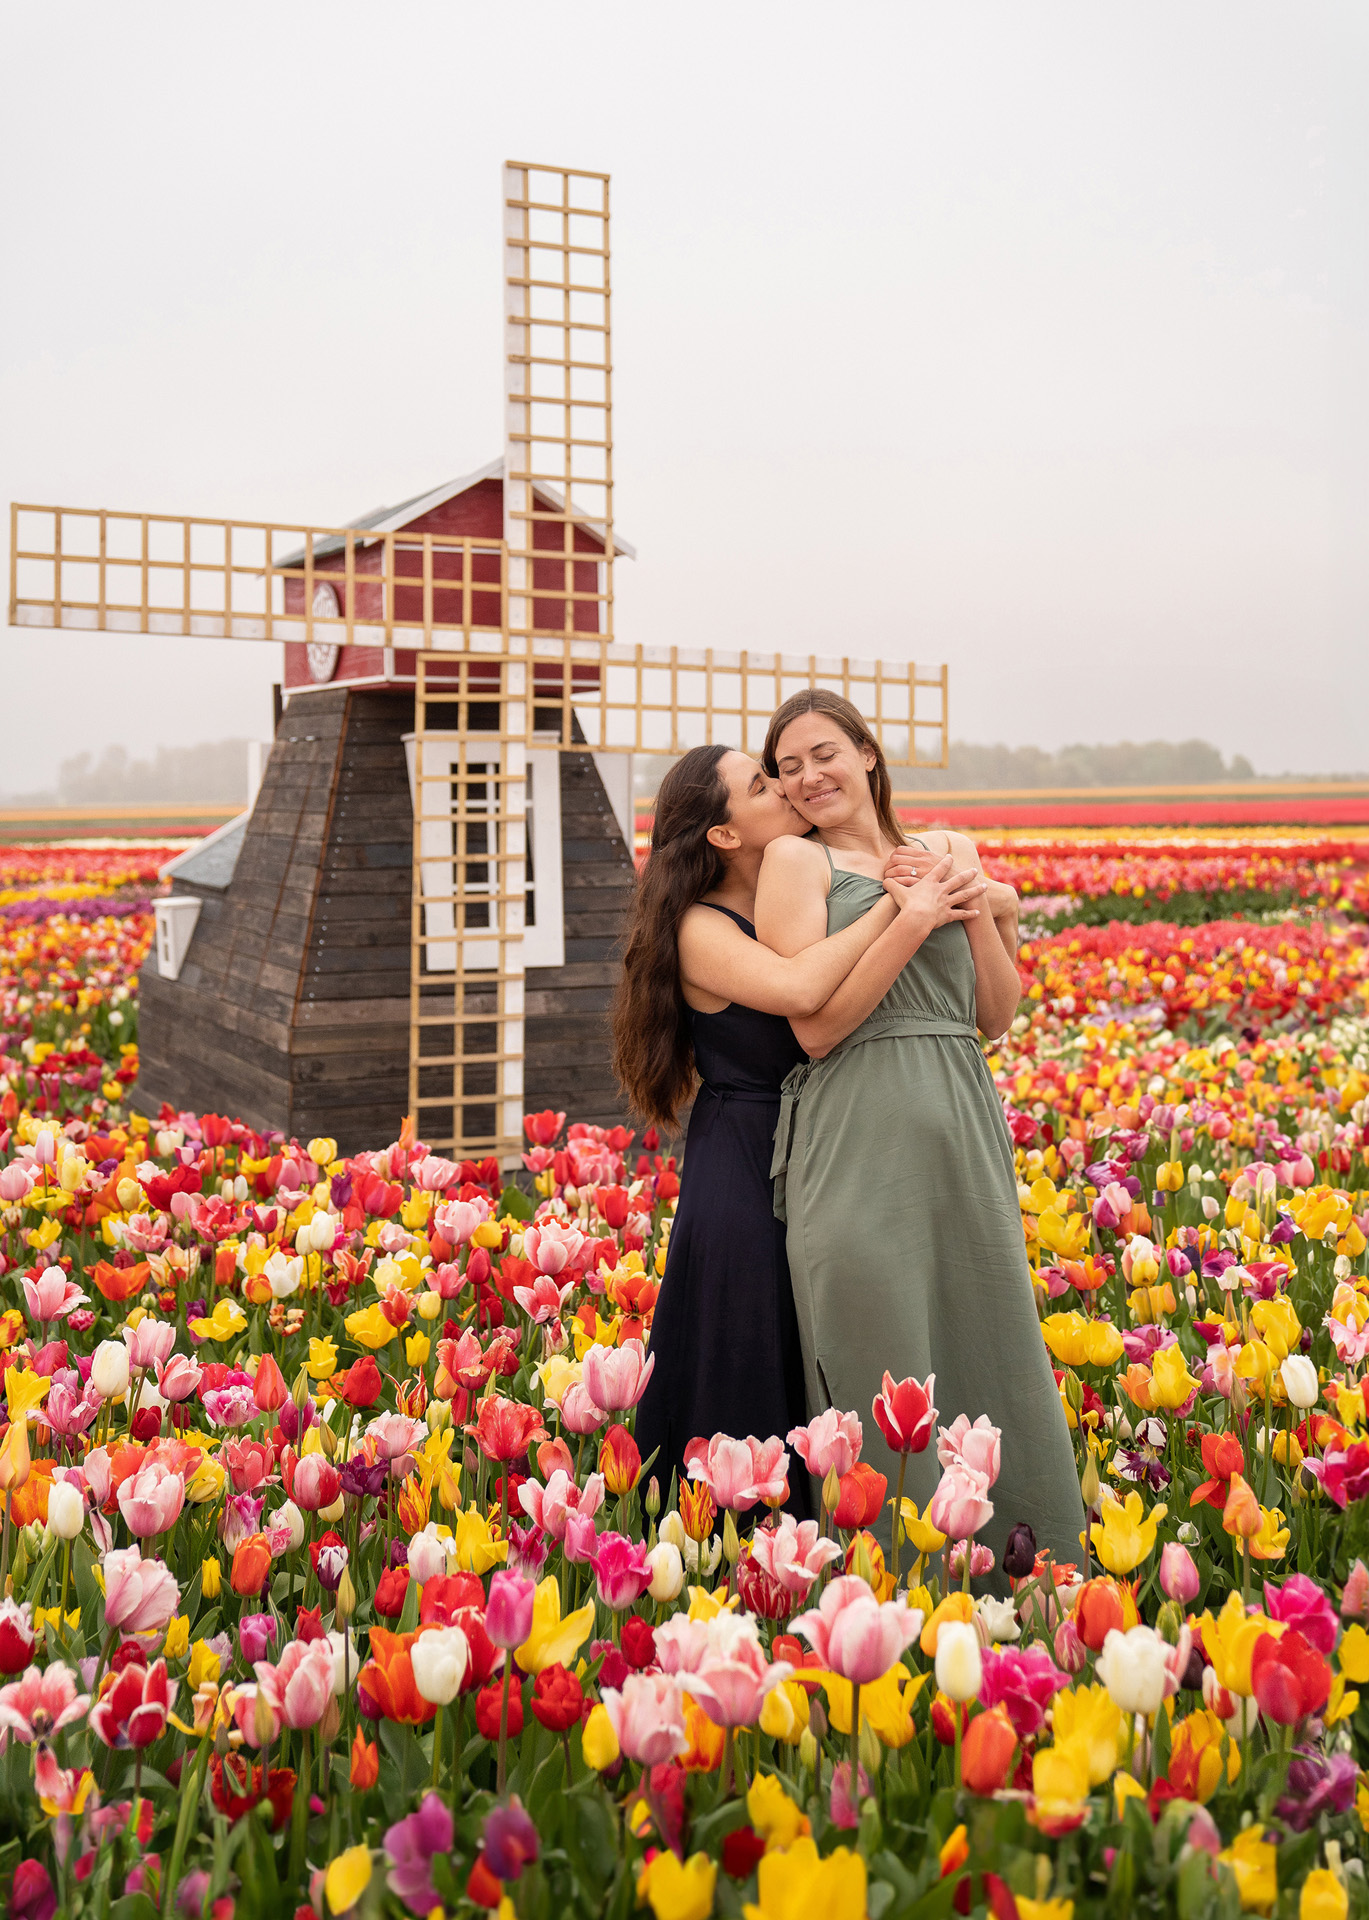 A lesbian couple with a windmill as backdrop in a tulip farm in The Netherlands.